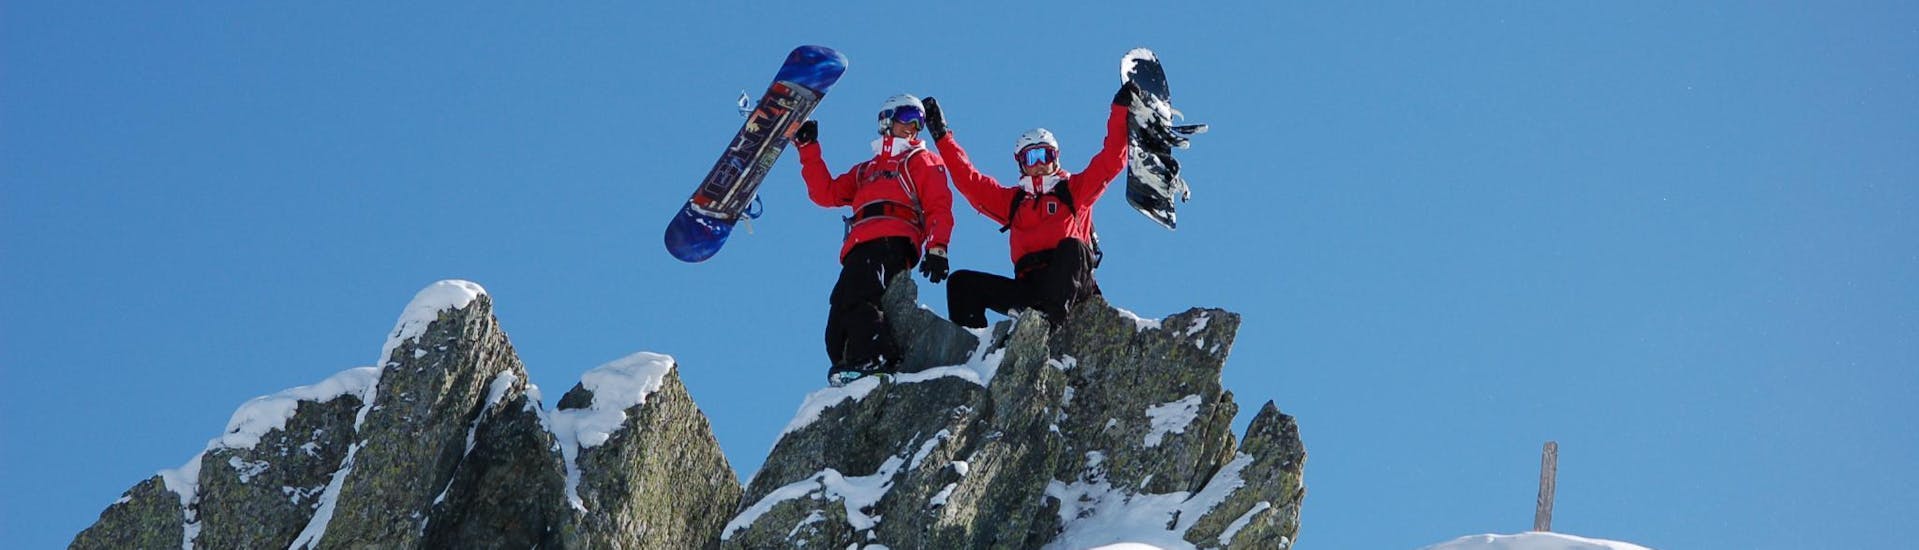 In the Snowboarding Lessons for Kids & Adults - With Experience two snowboard instructors of the ski school Skischule Kitzbühel Rote Teufel climbed on a rock and are posing for a photo with their snowboards.